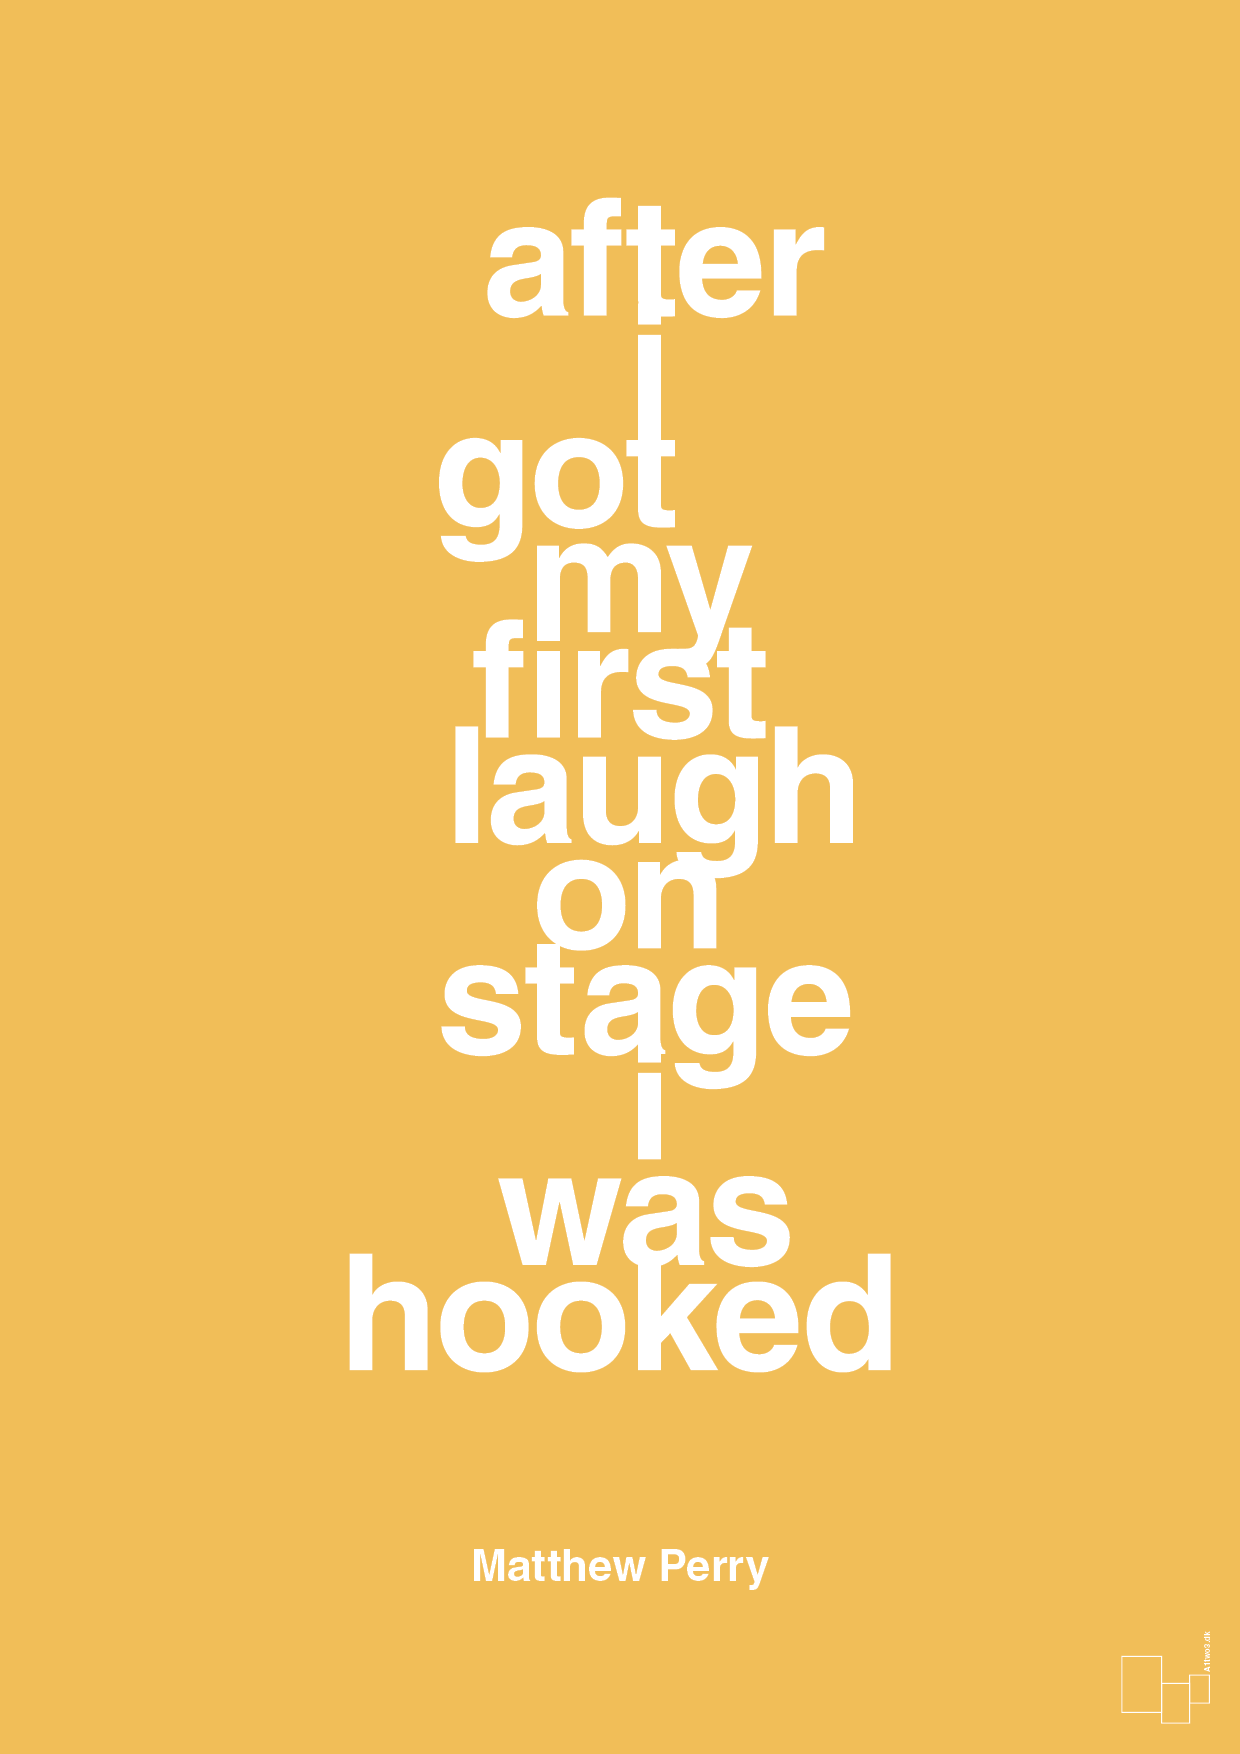 after i got my first laugh on stage i was hooked - Plakat med Citater i Honeycomb